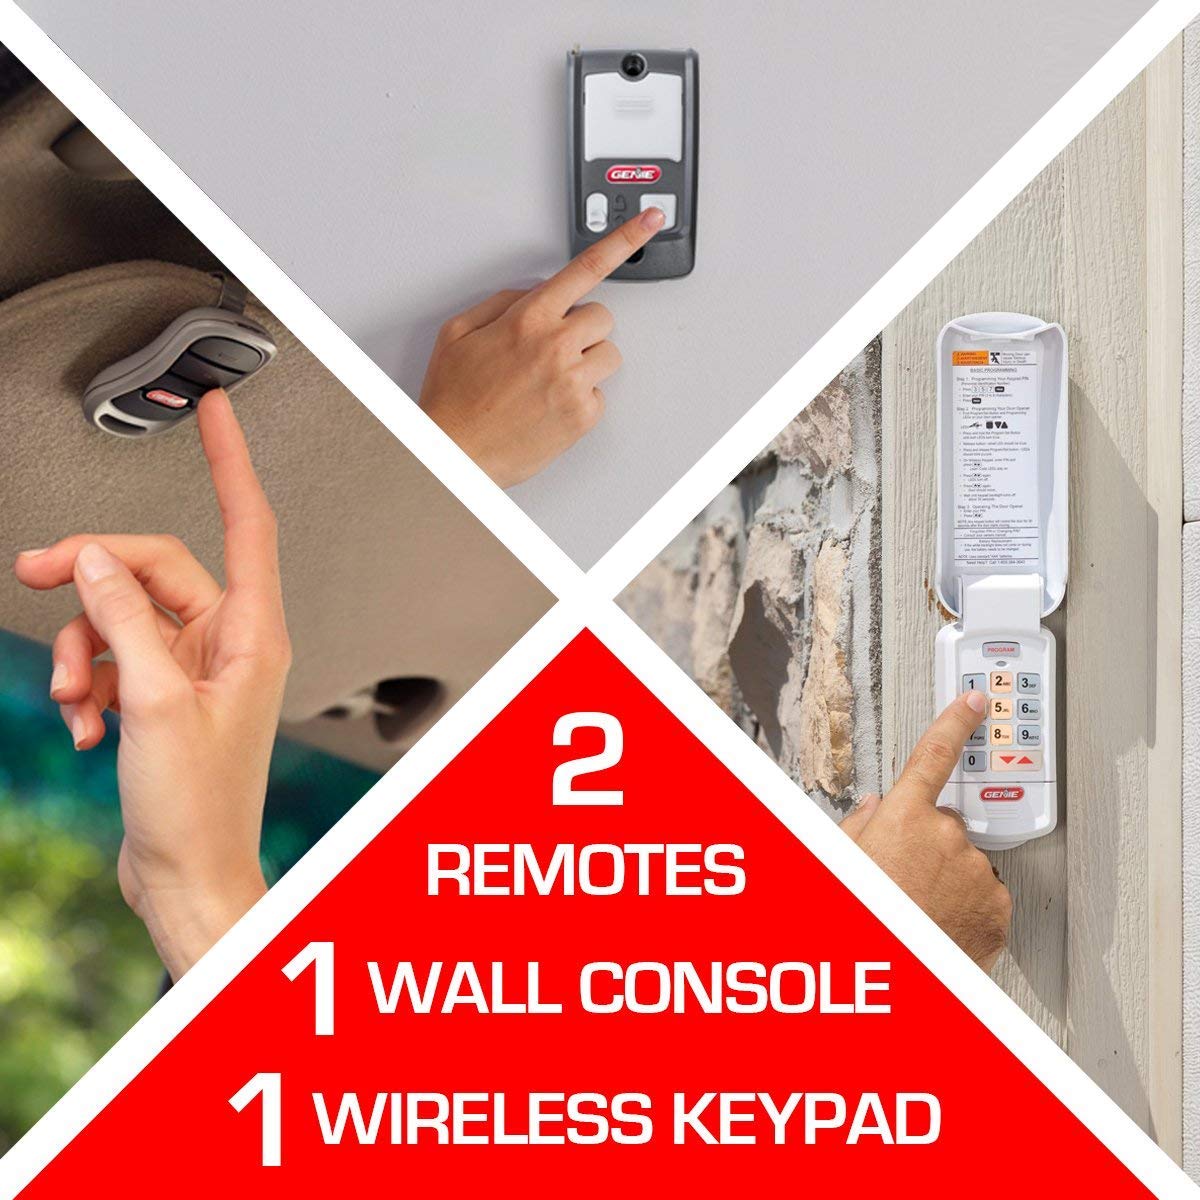 Includes these popular accessories needed to operate the garage door opener - 2-remotes, a wall console, and wireless keypad 